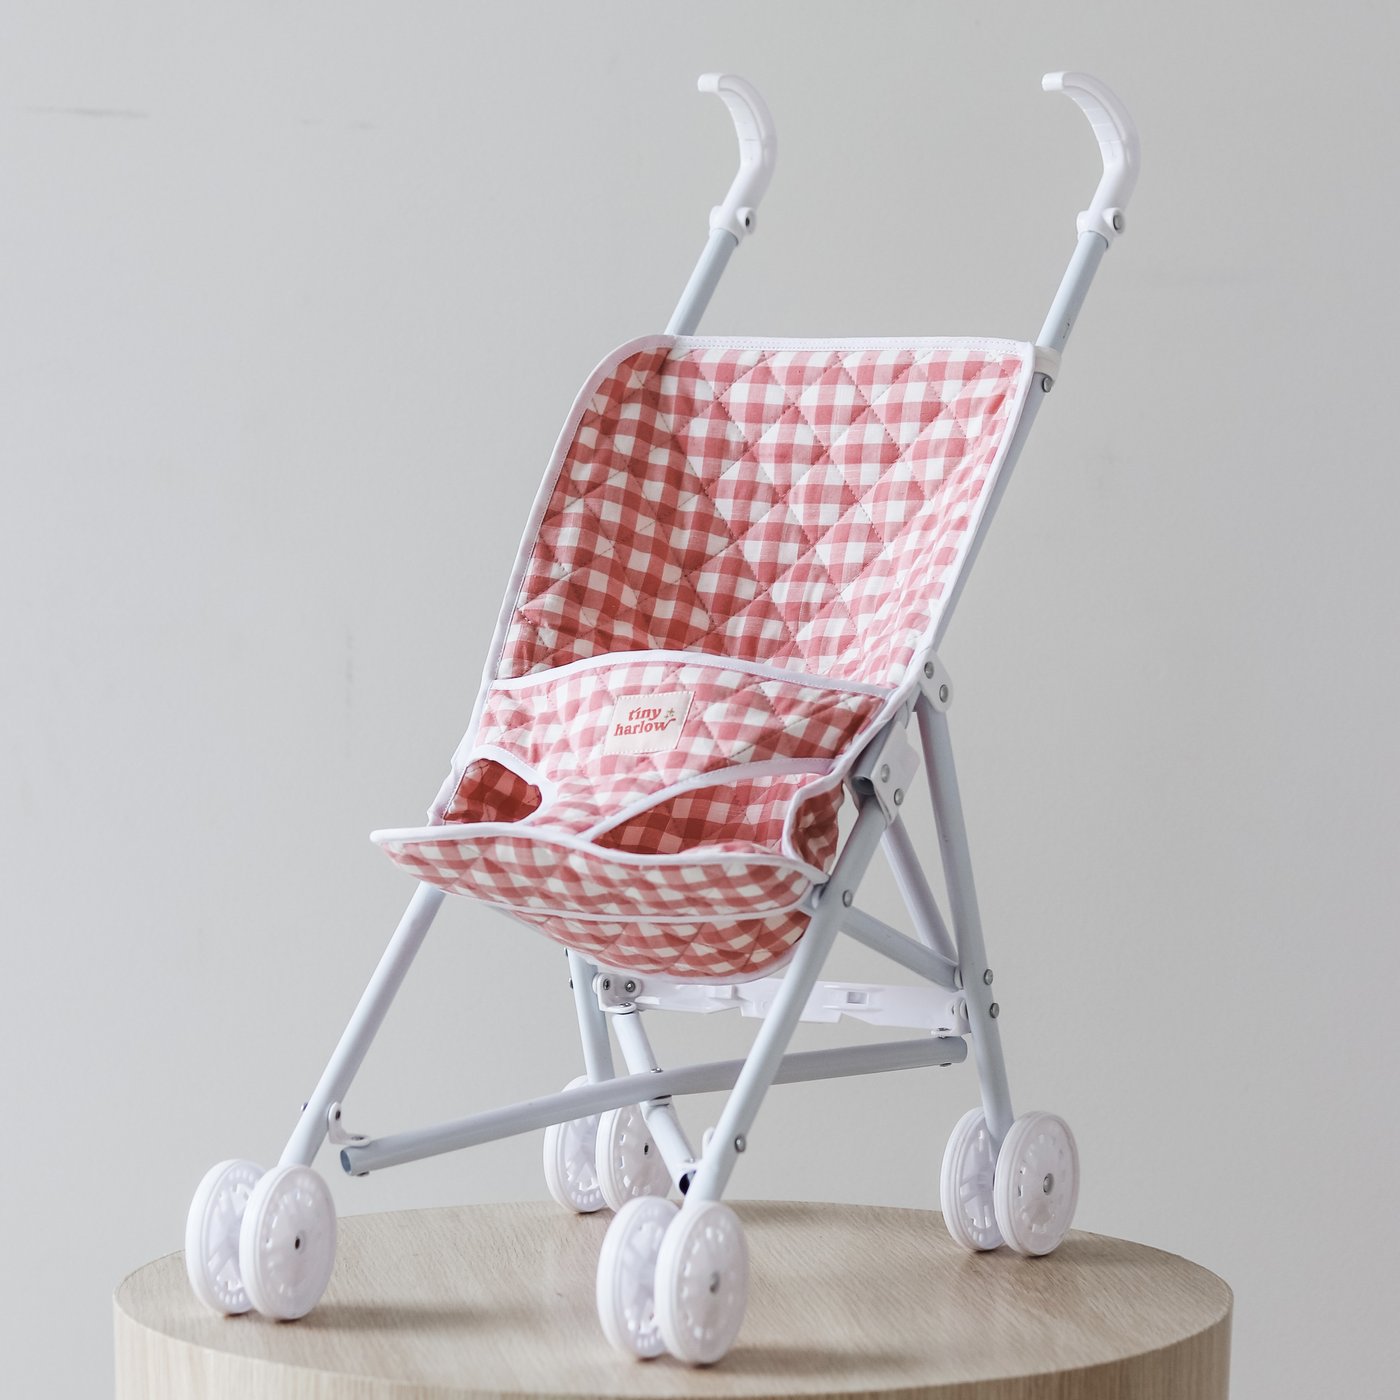 Tiny Harlow Doll Stroller in Pink Gingham - A Must-Have from Tiny Tours!